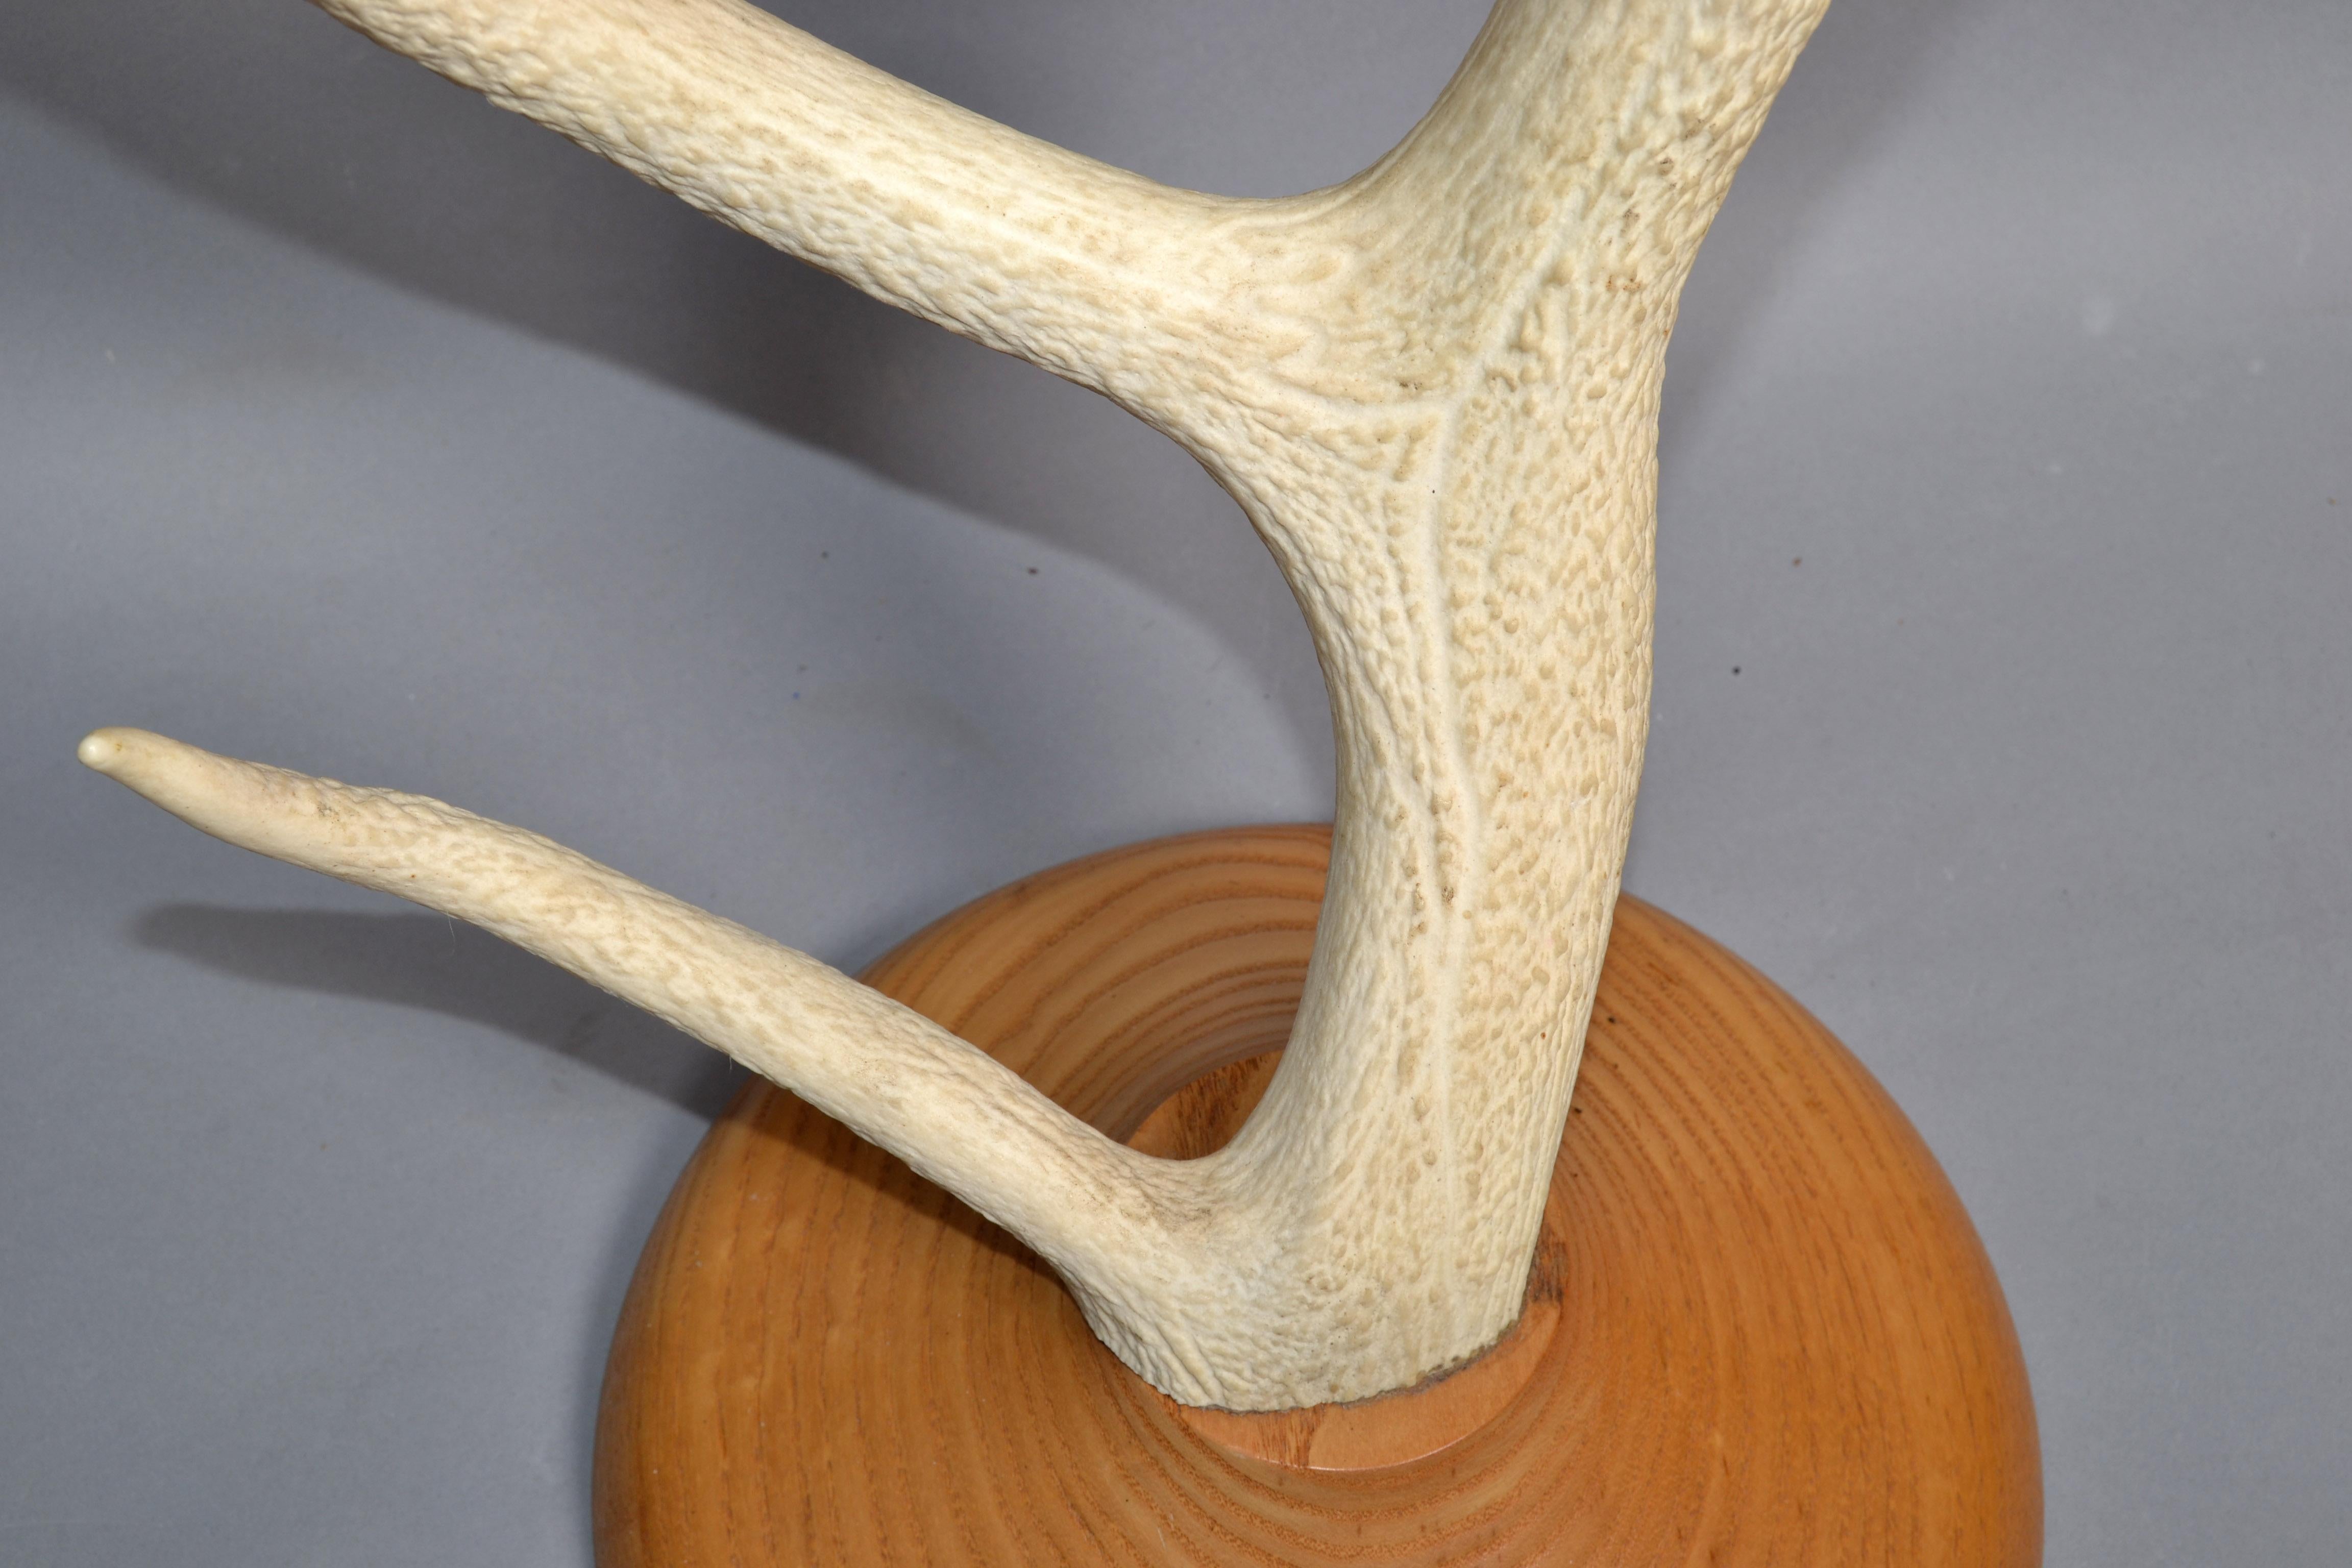 Rustic Taxidermy White Tail Deer Buck Antlers Horns Candle Holder Oak Round Base In Good Condition For Sale In Miami, FL